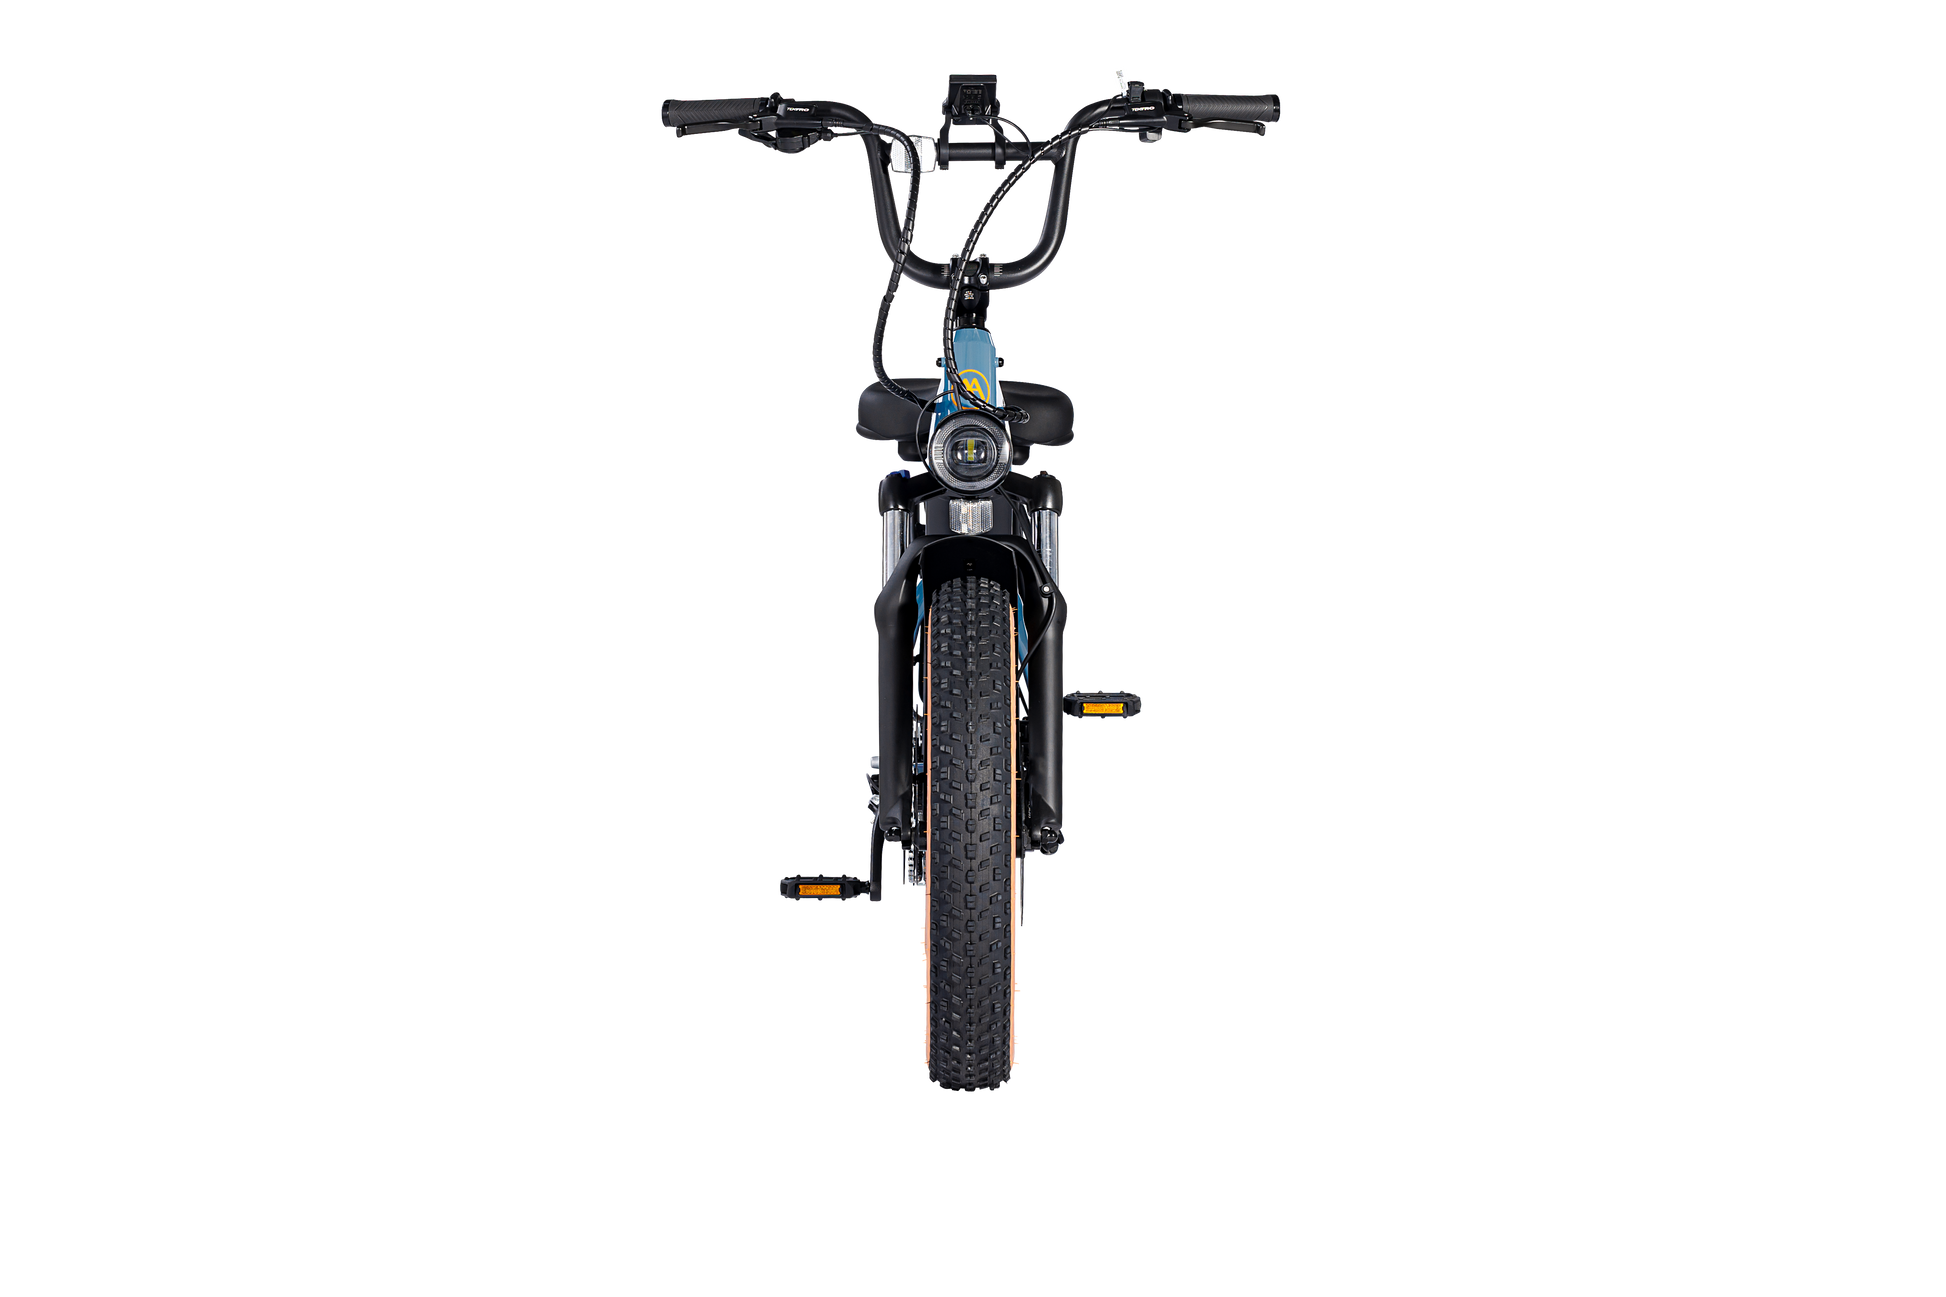 Front view of a black AIMA - Big Sur Sport electric bicycle with a large headlight, wide handlebars, and fat tires, boasting a class 2/3 rating.